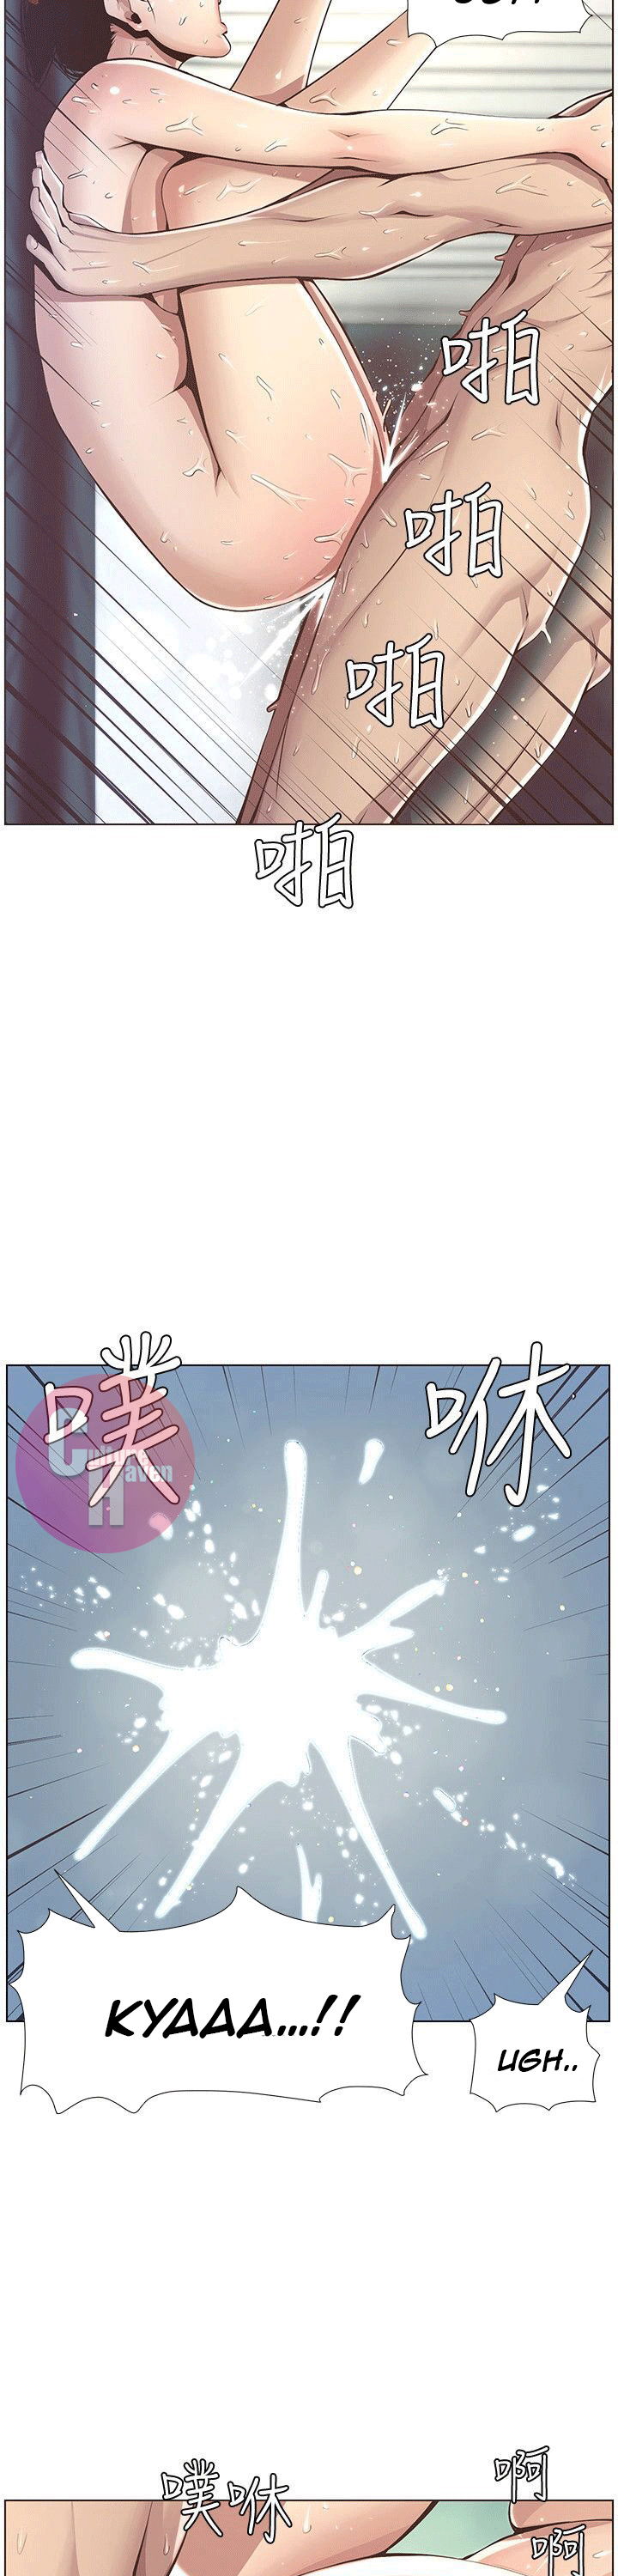 fathers-lust-chap-3-22